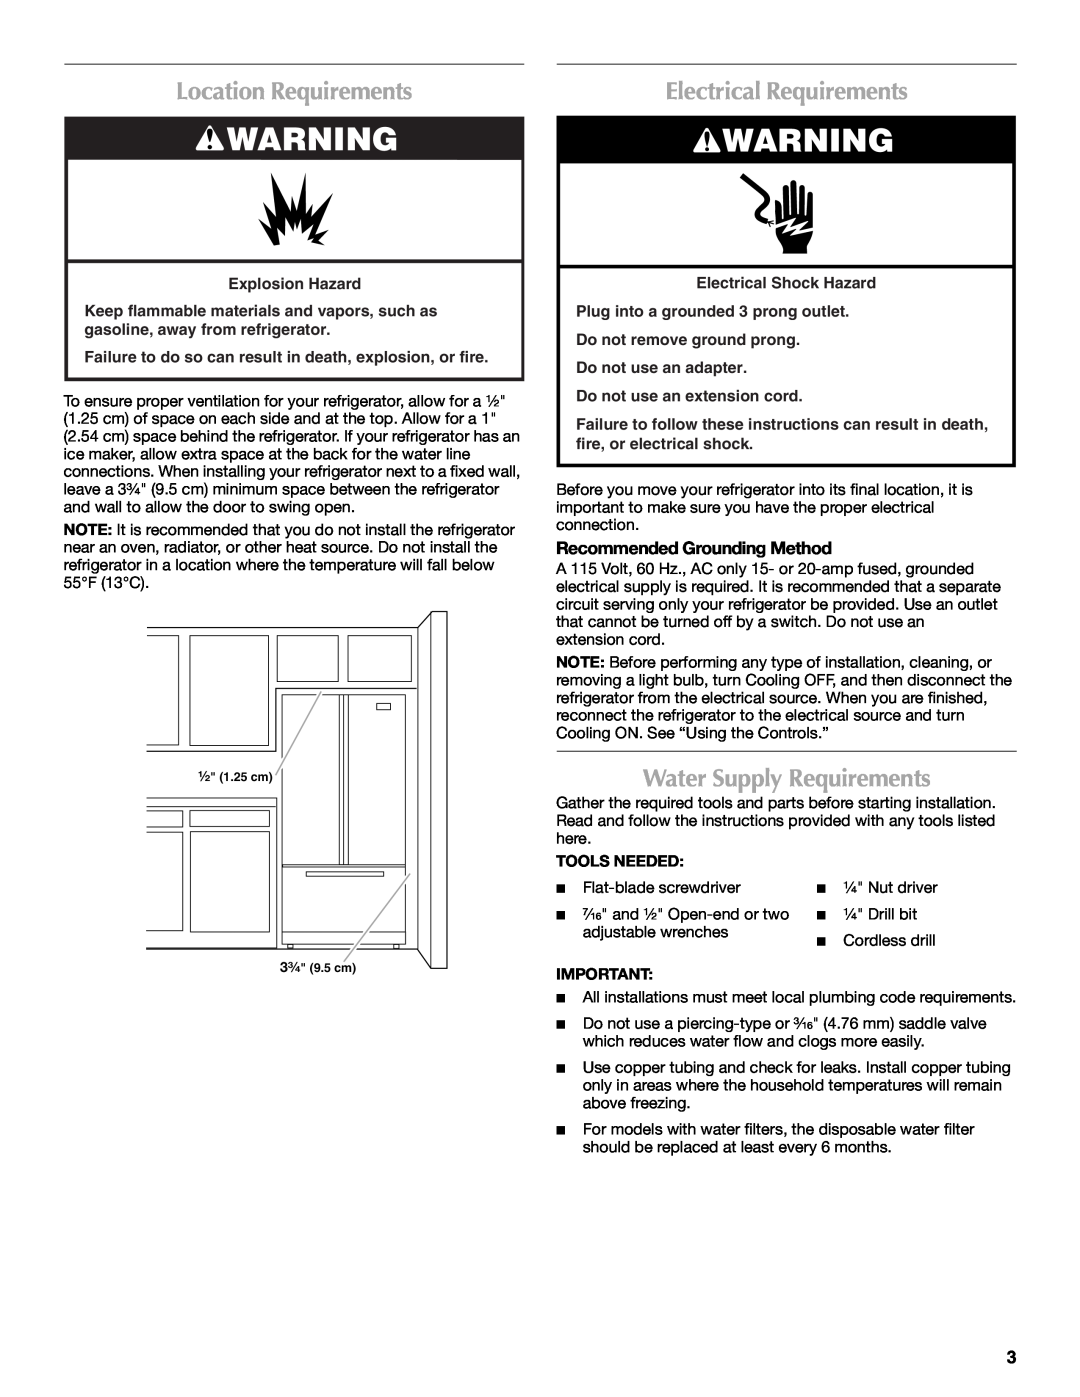 Maytag MFX2571XEW Location Requirements, Electrical Requirements, Water Supply Requirements, Recommended Grounding Method 